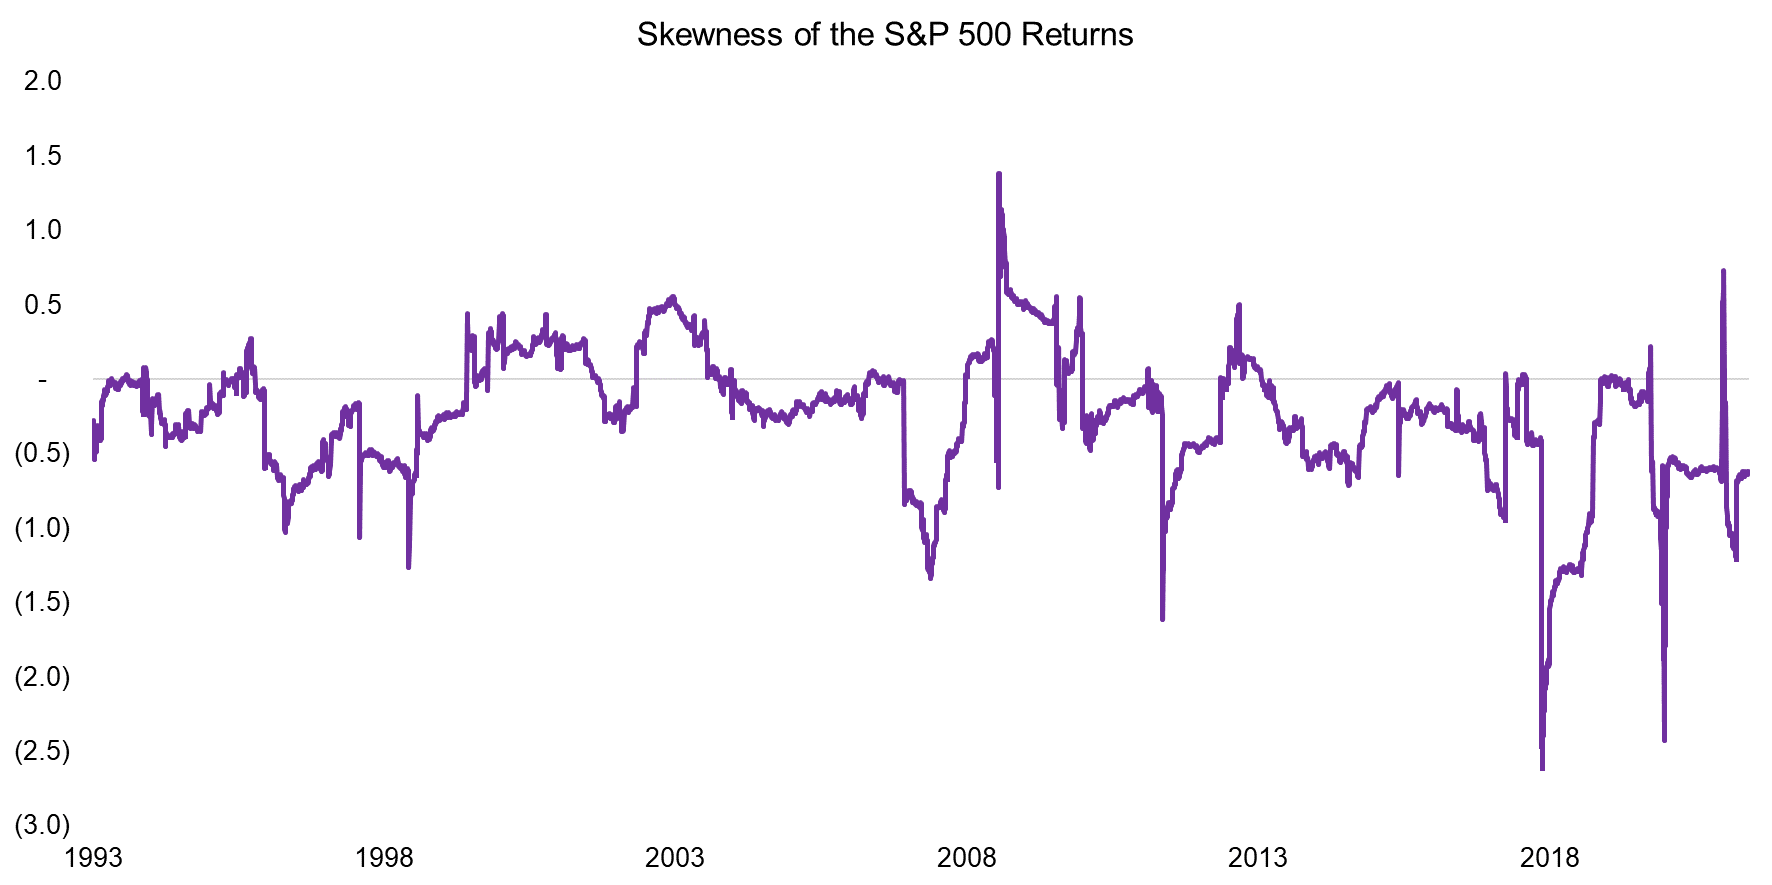 Skewness of the S&P 500 Returns